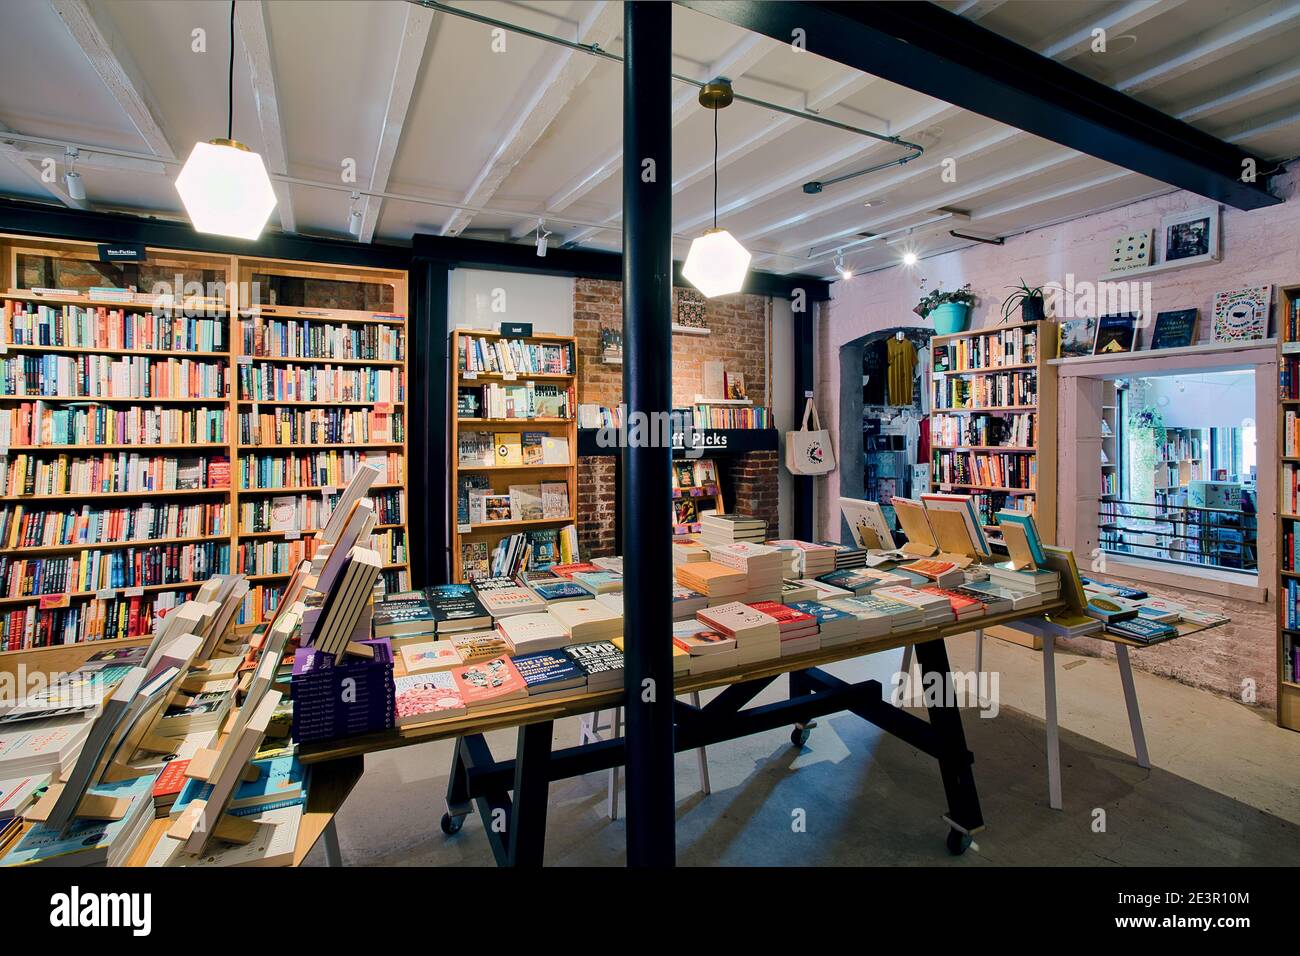 USA / New York City / Brooklyn / Bookstores / Indie bookstore Books Are Magic in Brooklyn , New York . Stock Photo